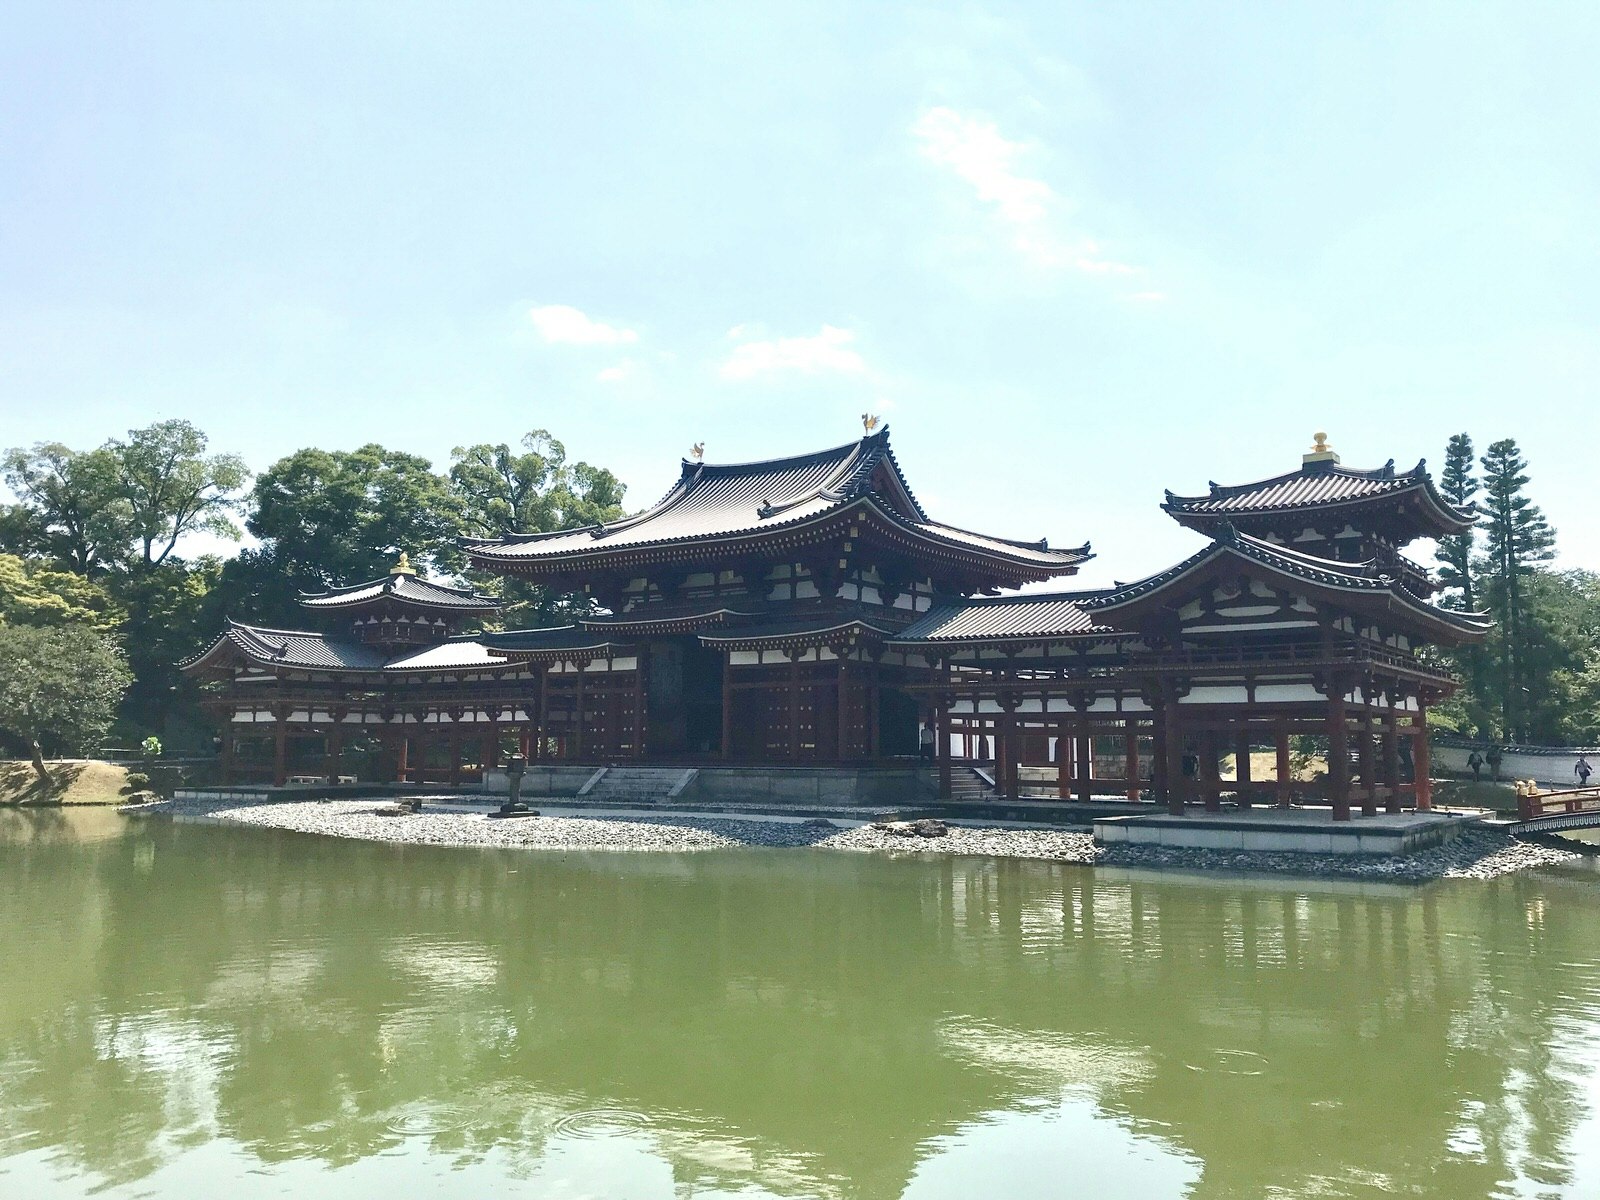 Byōdō-in temple in Uji, viewed from across a still body of water on a clear day. 